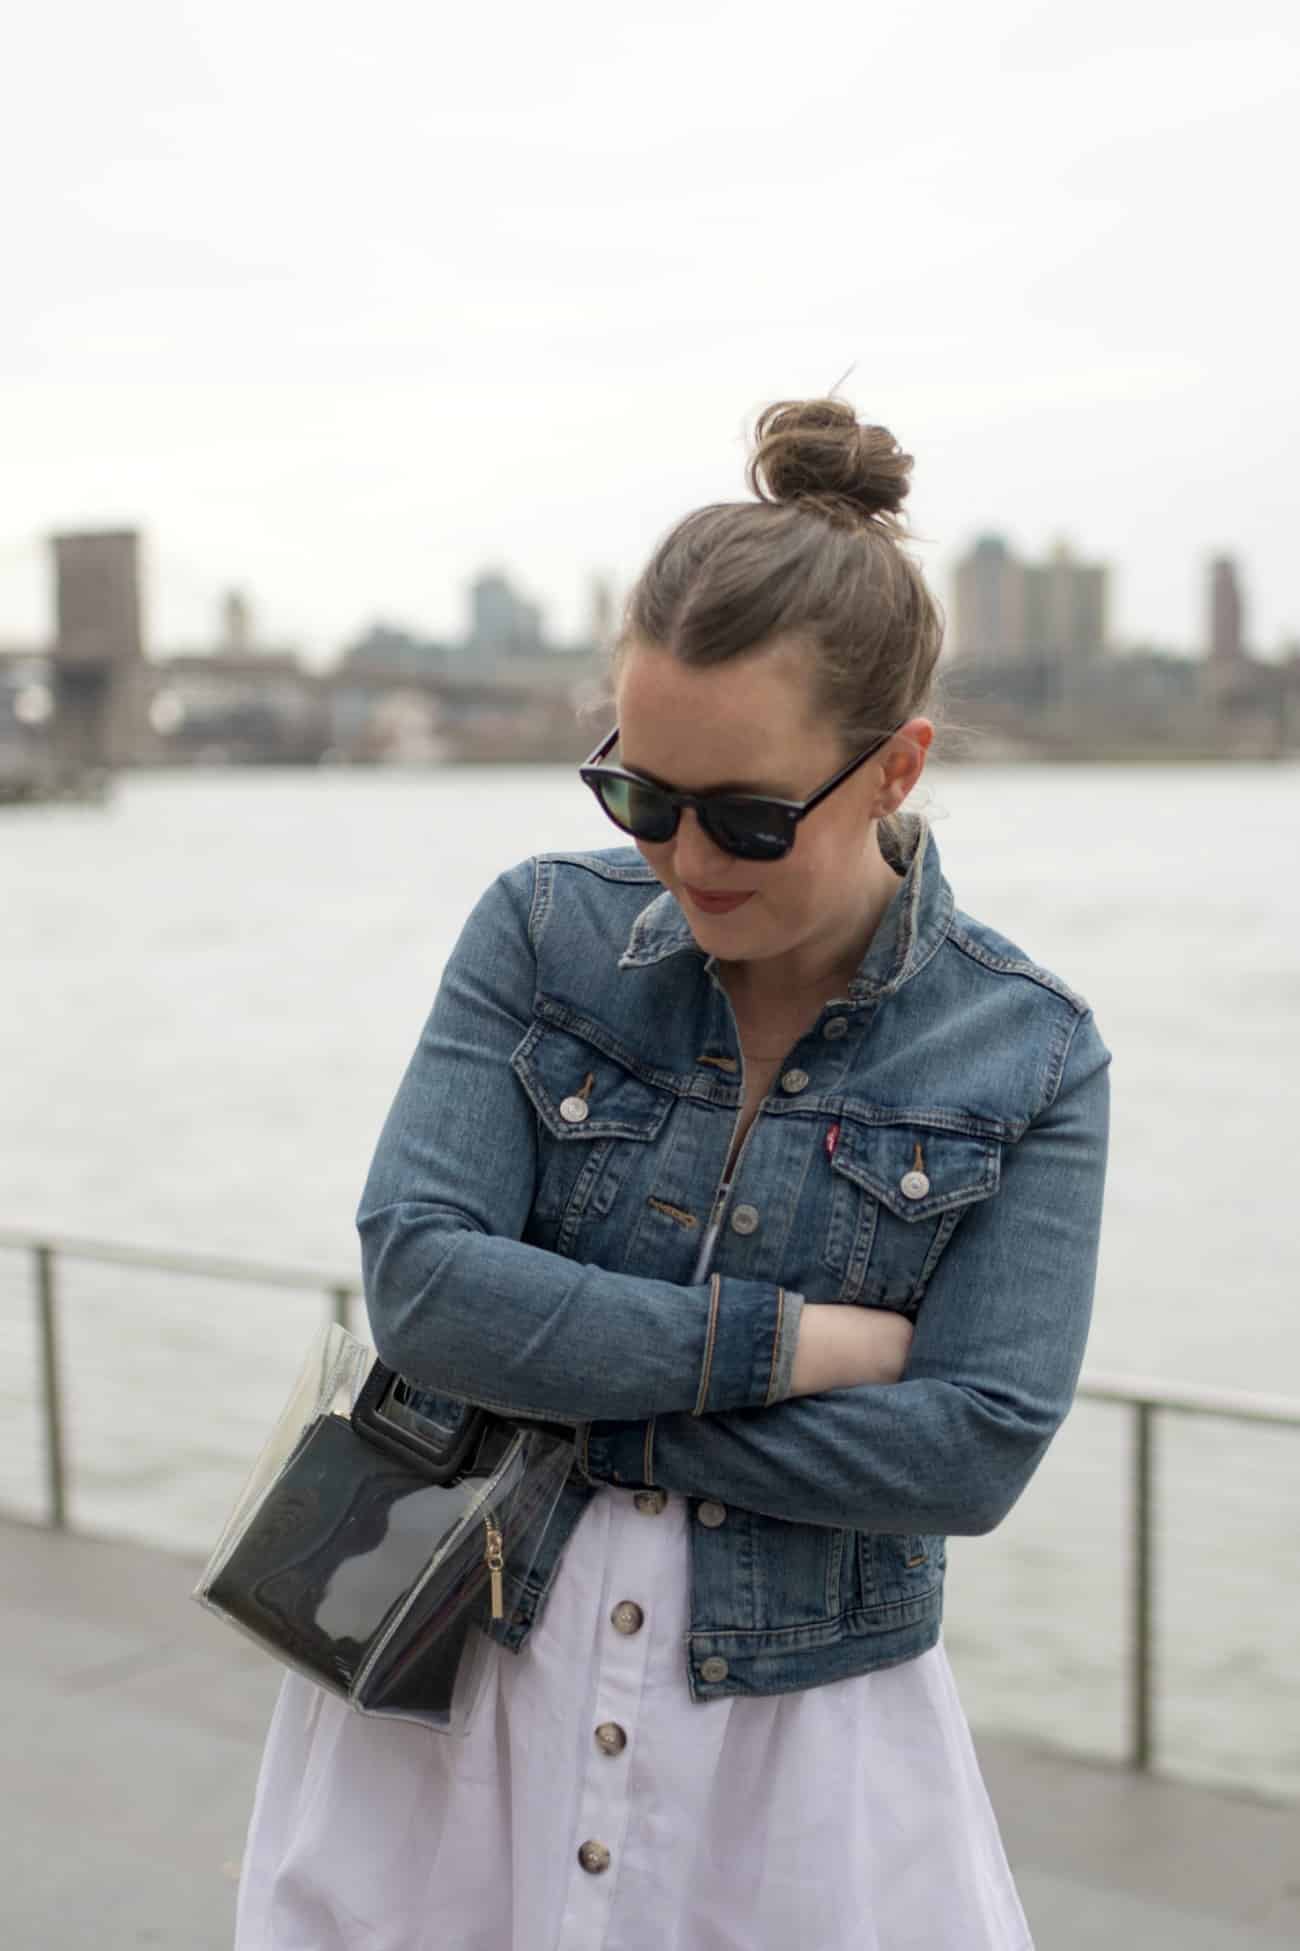 Christopher Cloos Sunglasses I NYC spots | wit & whimsy